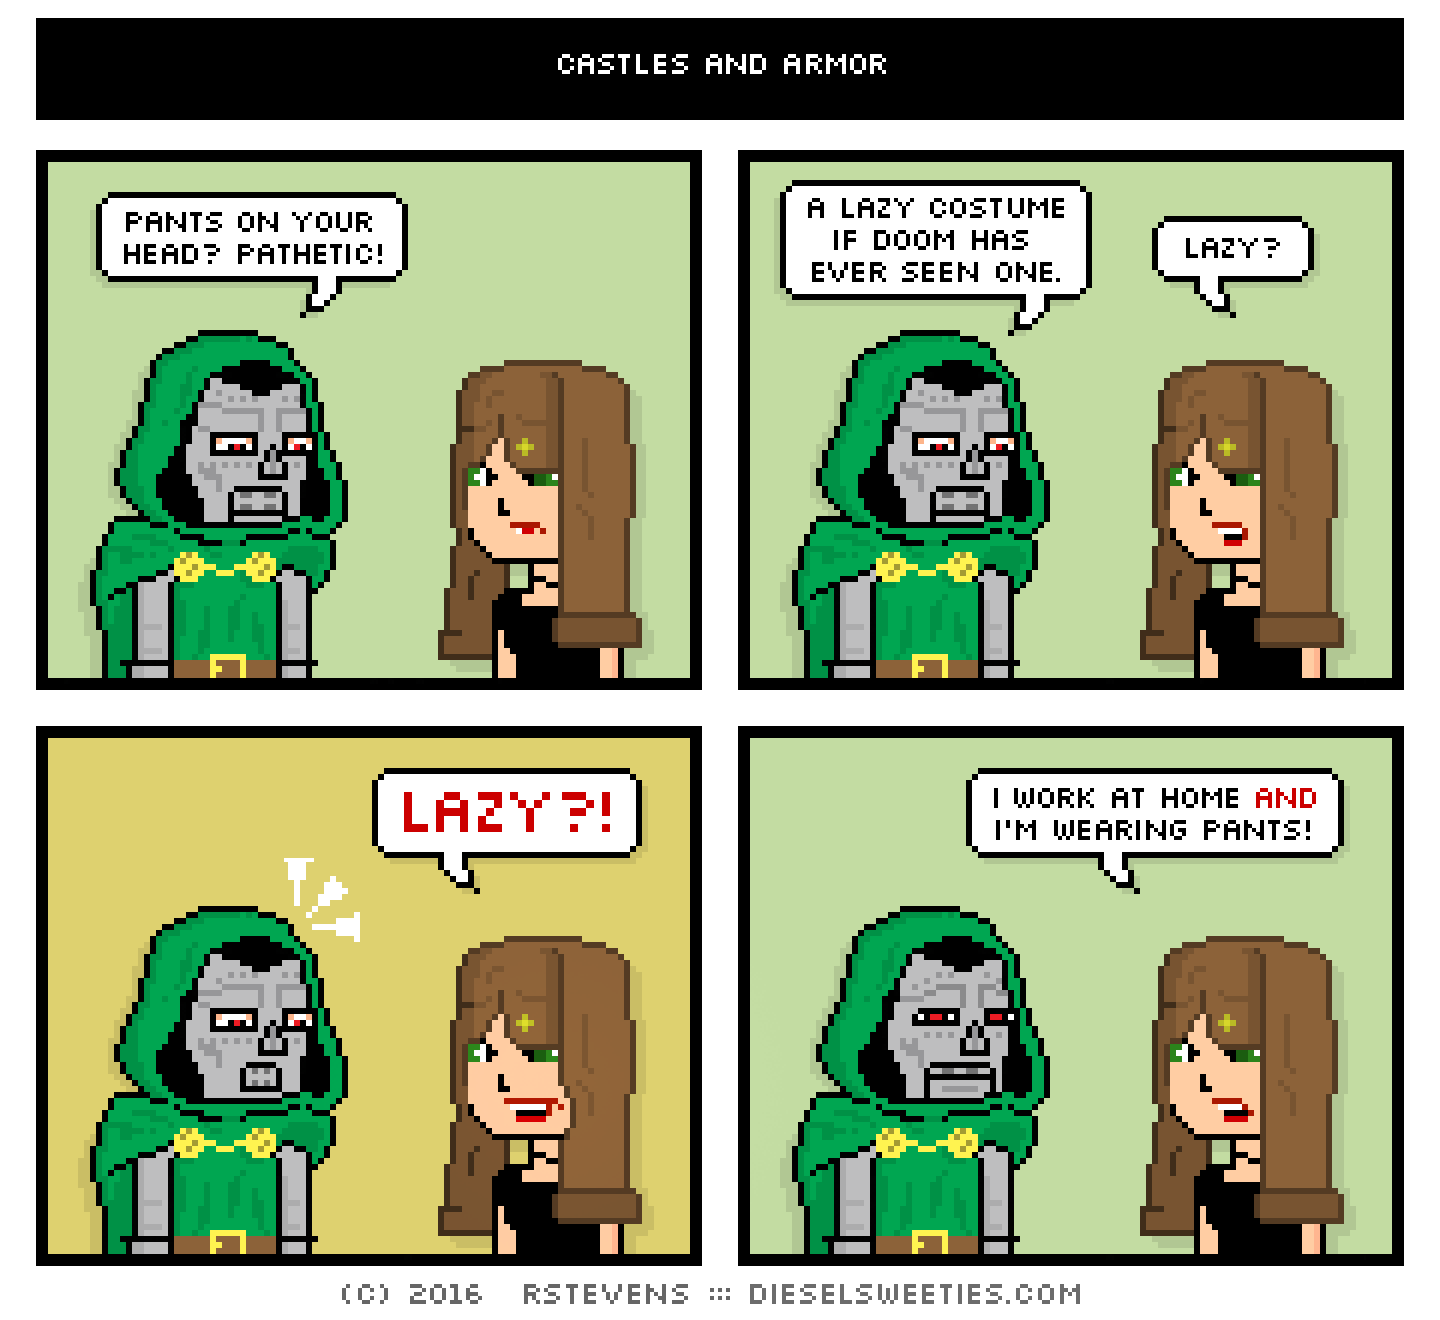 doctor doom, marvel, lil sis, pants on head : pants on your head? pathetic! a lazy costume if doom has ever seen one. lazy? lazy?! i work at home and i'm wearing pants!